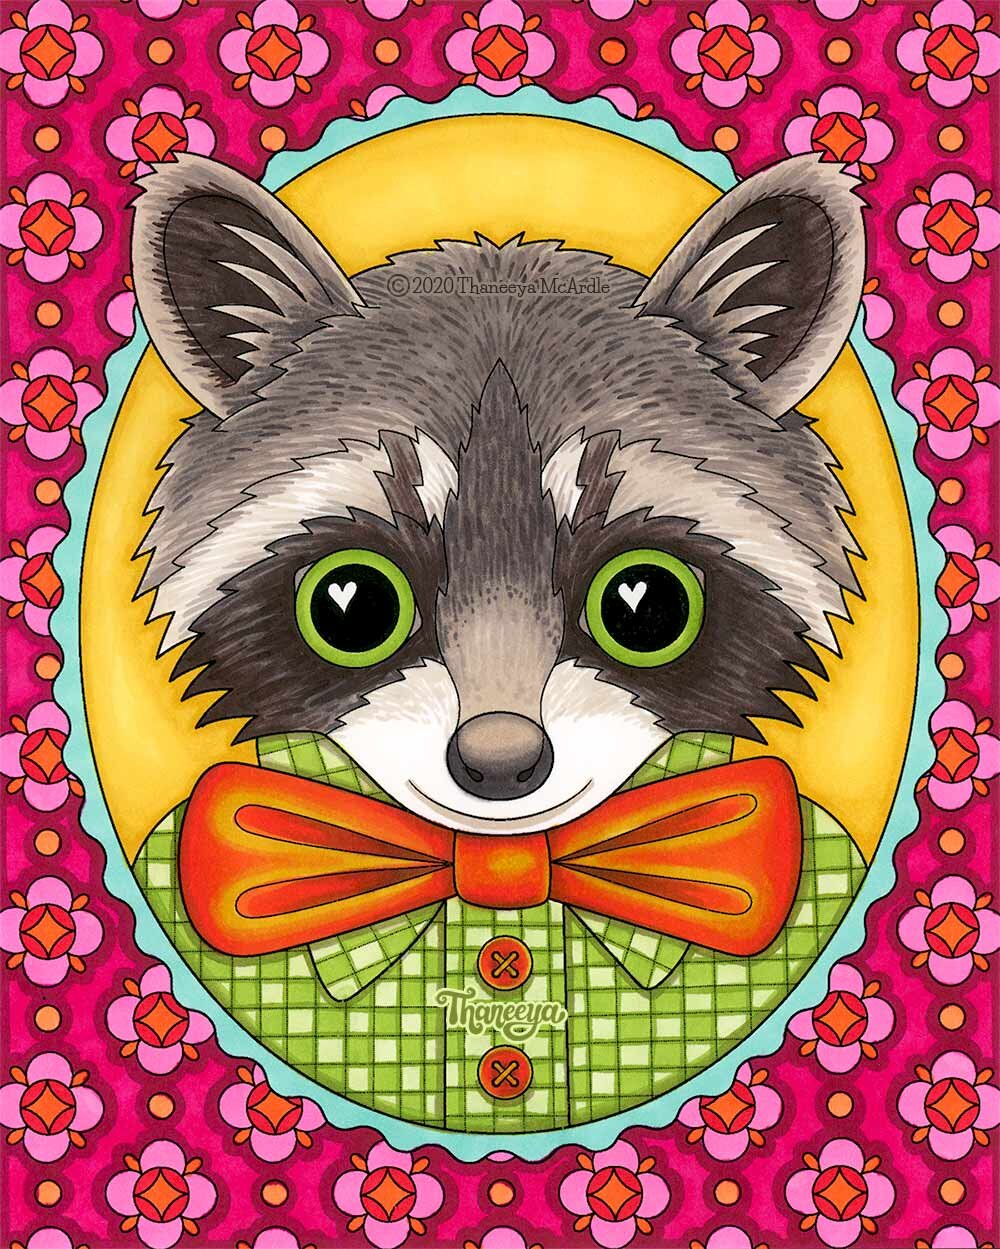 https://images.squarespace-cdn.com/content/v1/5511fc7ce4b0a3782aa9418b/1590772092273-Z49HSMBZR0YYDTR43WZW/Cute-Raccoon-Coloring-Page-by-Thaneeya-McArdle-1000a.jpg